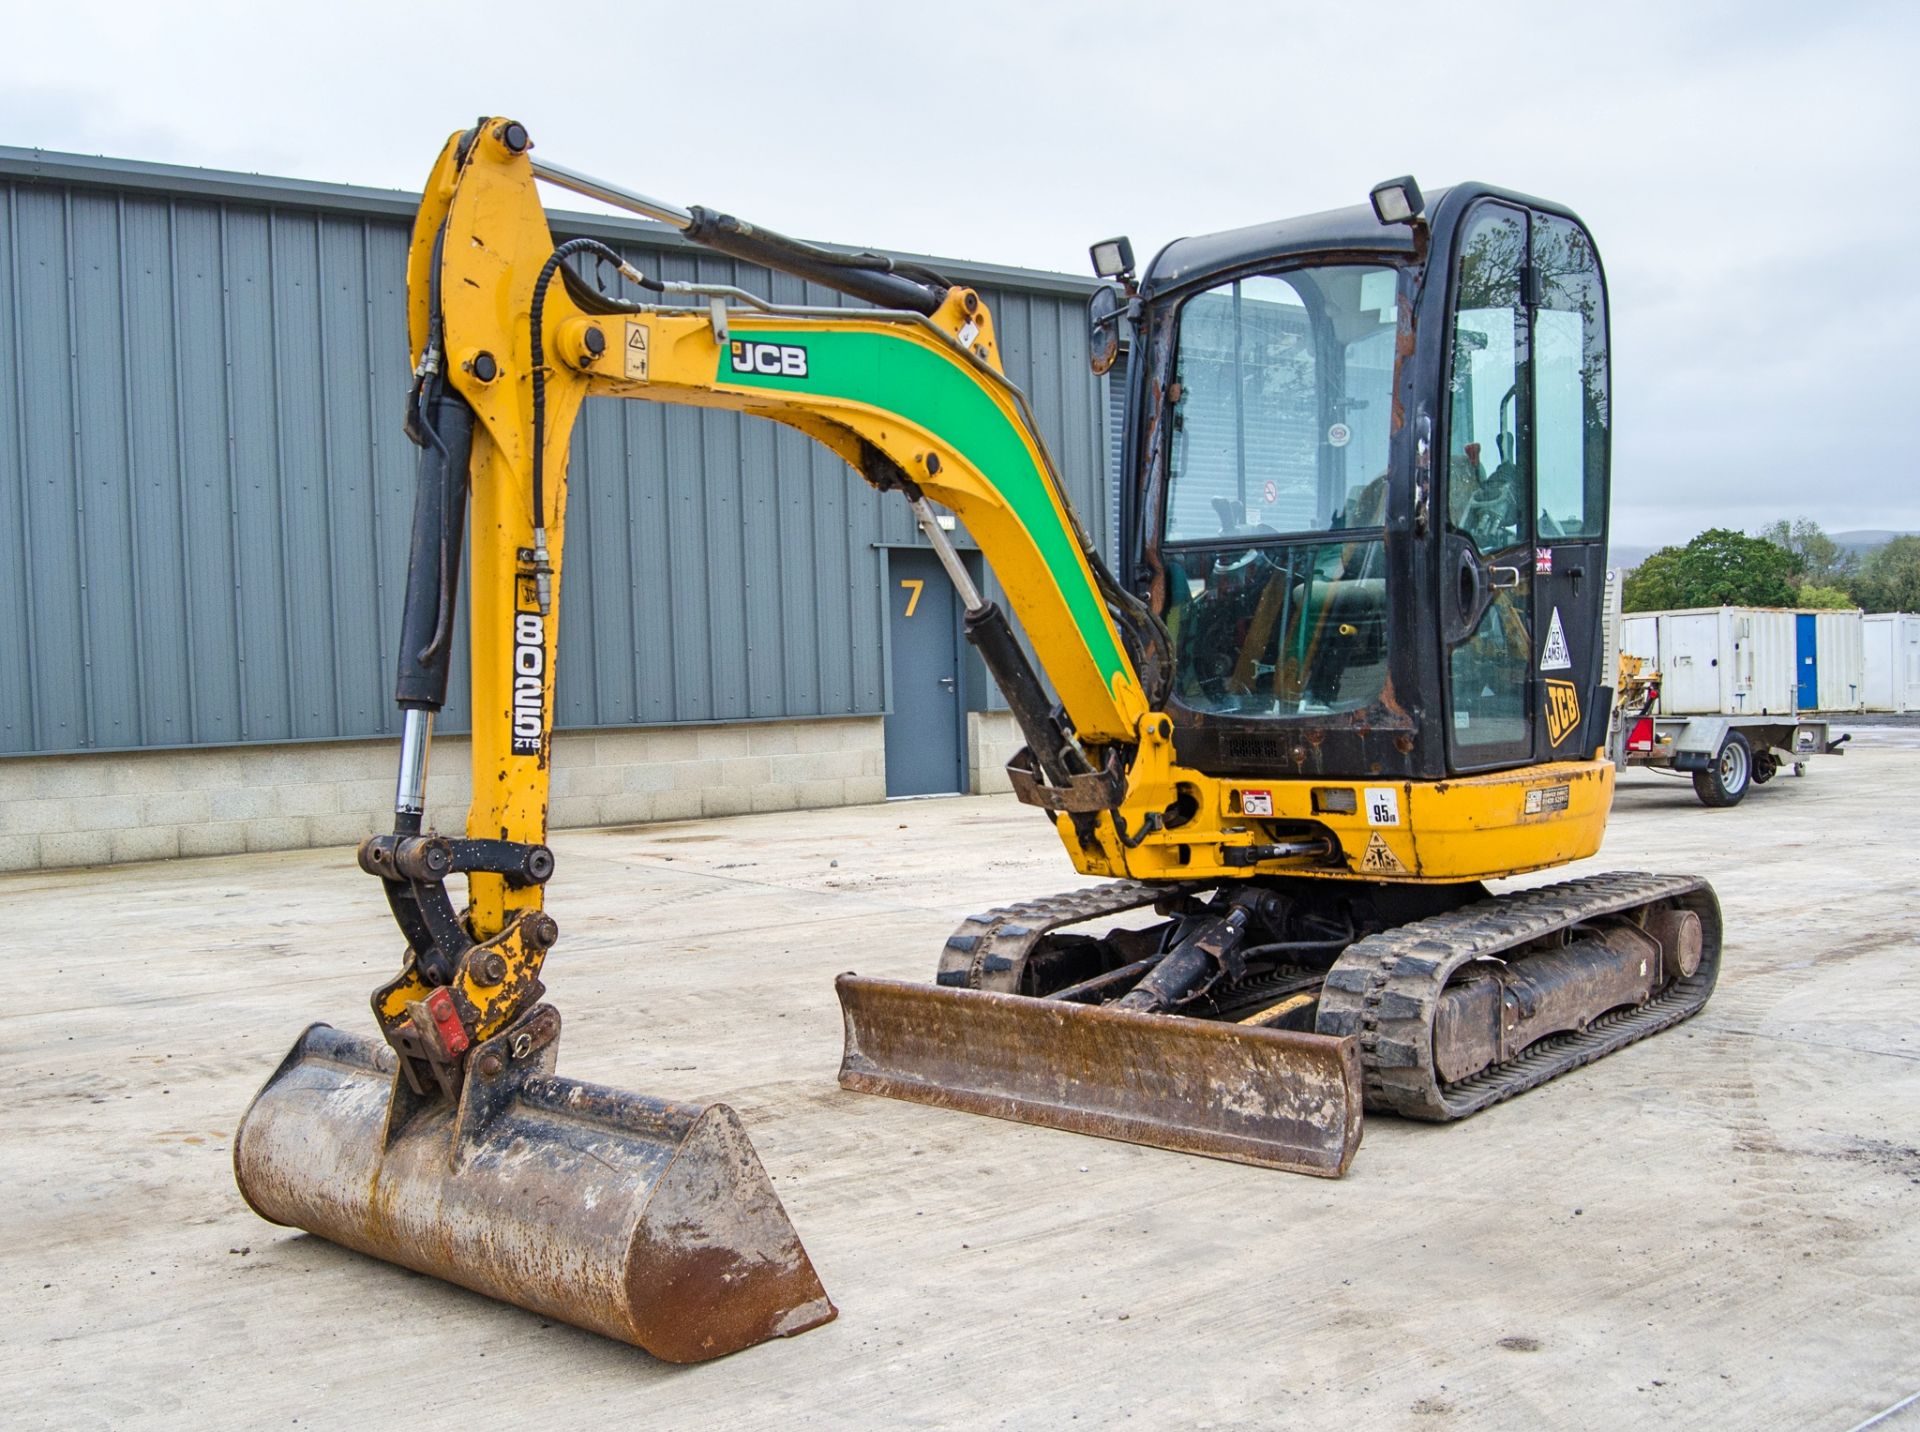 JCB 8025 ZTS 2.5 tonne rubber tracked excavator Year: 2015 S/N: 2226977 Recorded Hours: 1966